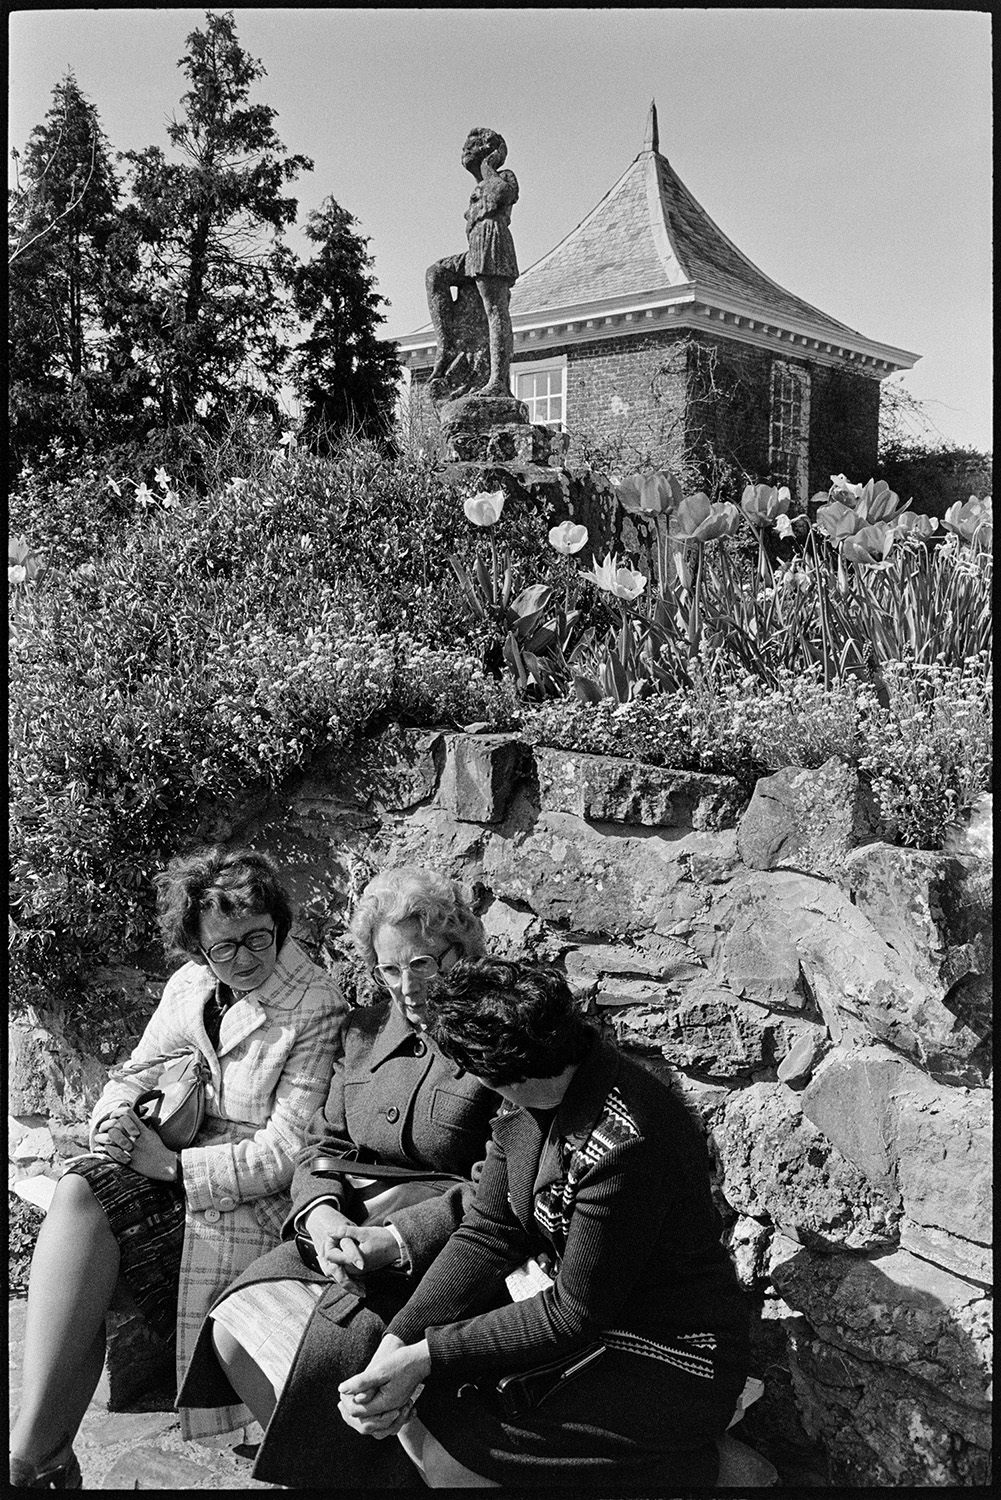 Garden party, open day visitors. 
[Three women sat on a bench talking at a garden party or open day in Fremington. A flower bed, statue and part of a building can be seen in the background.]